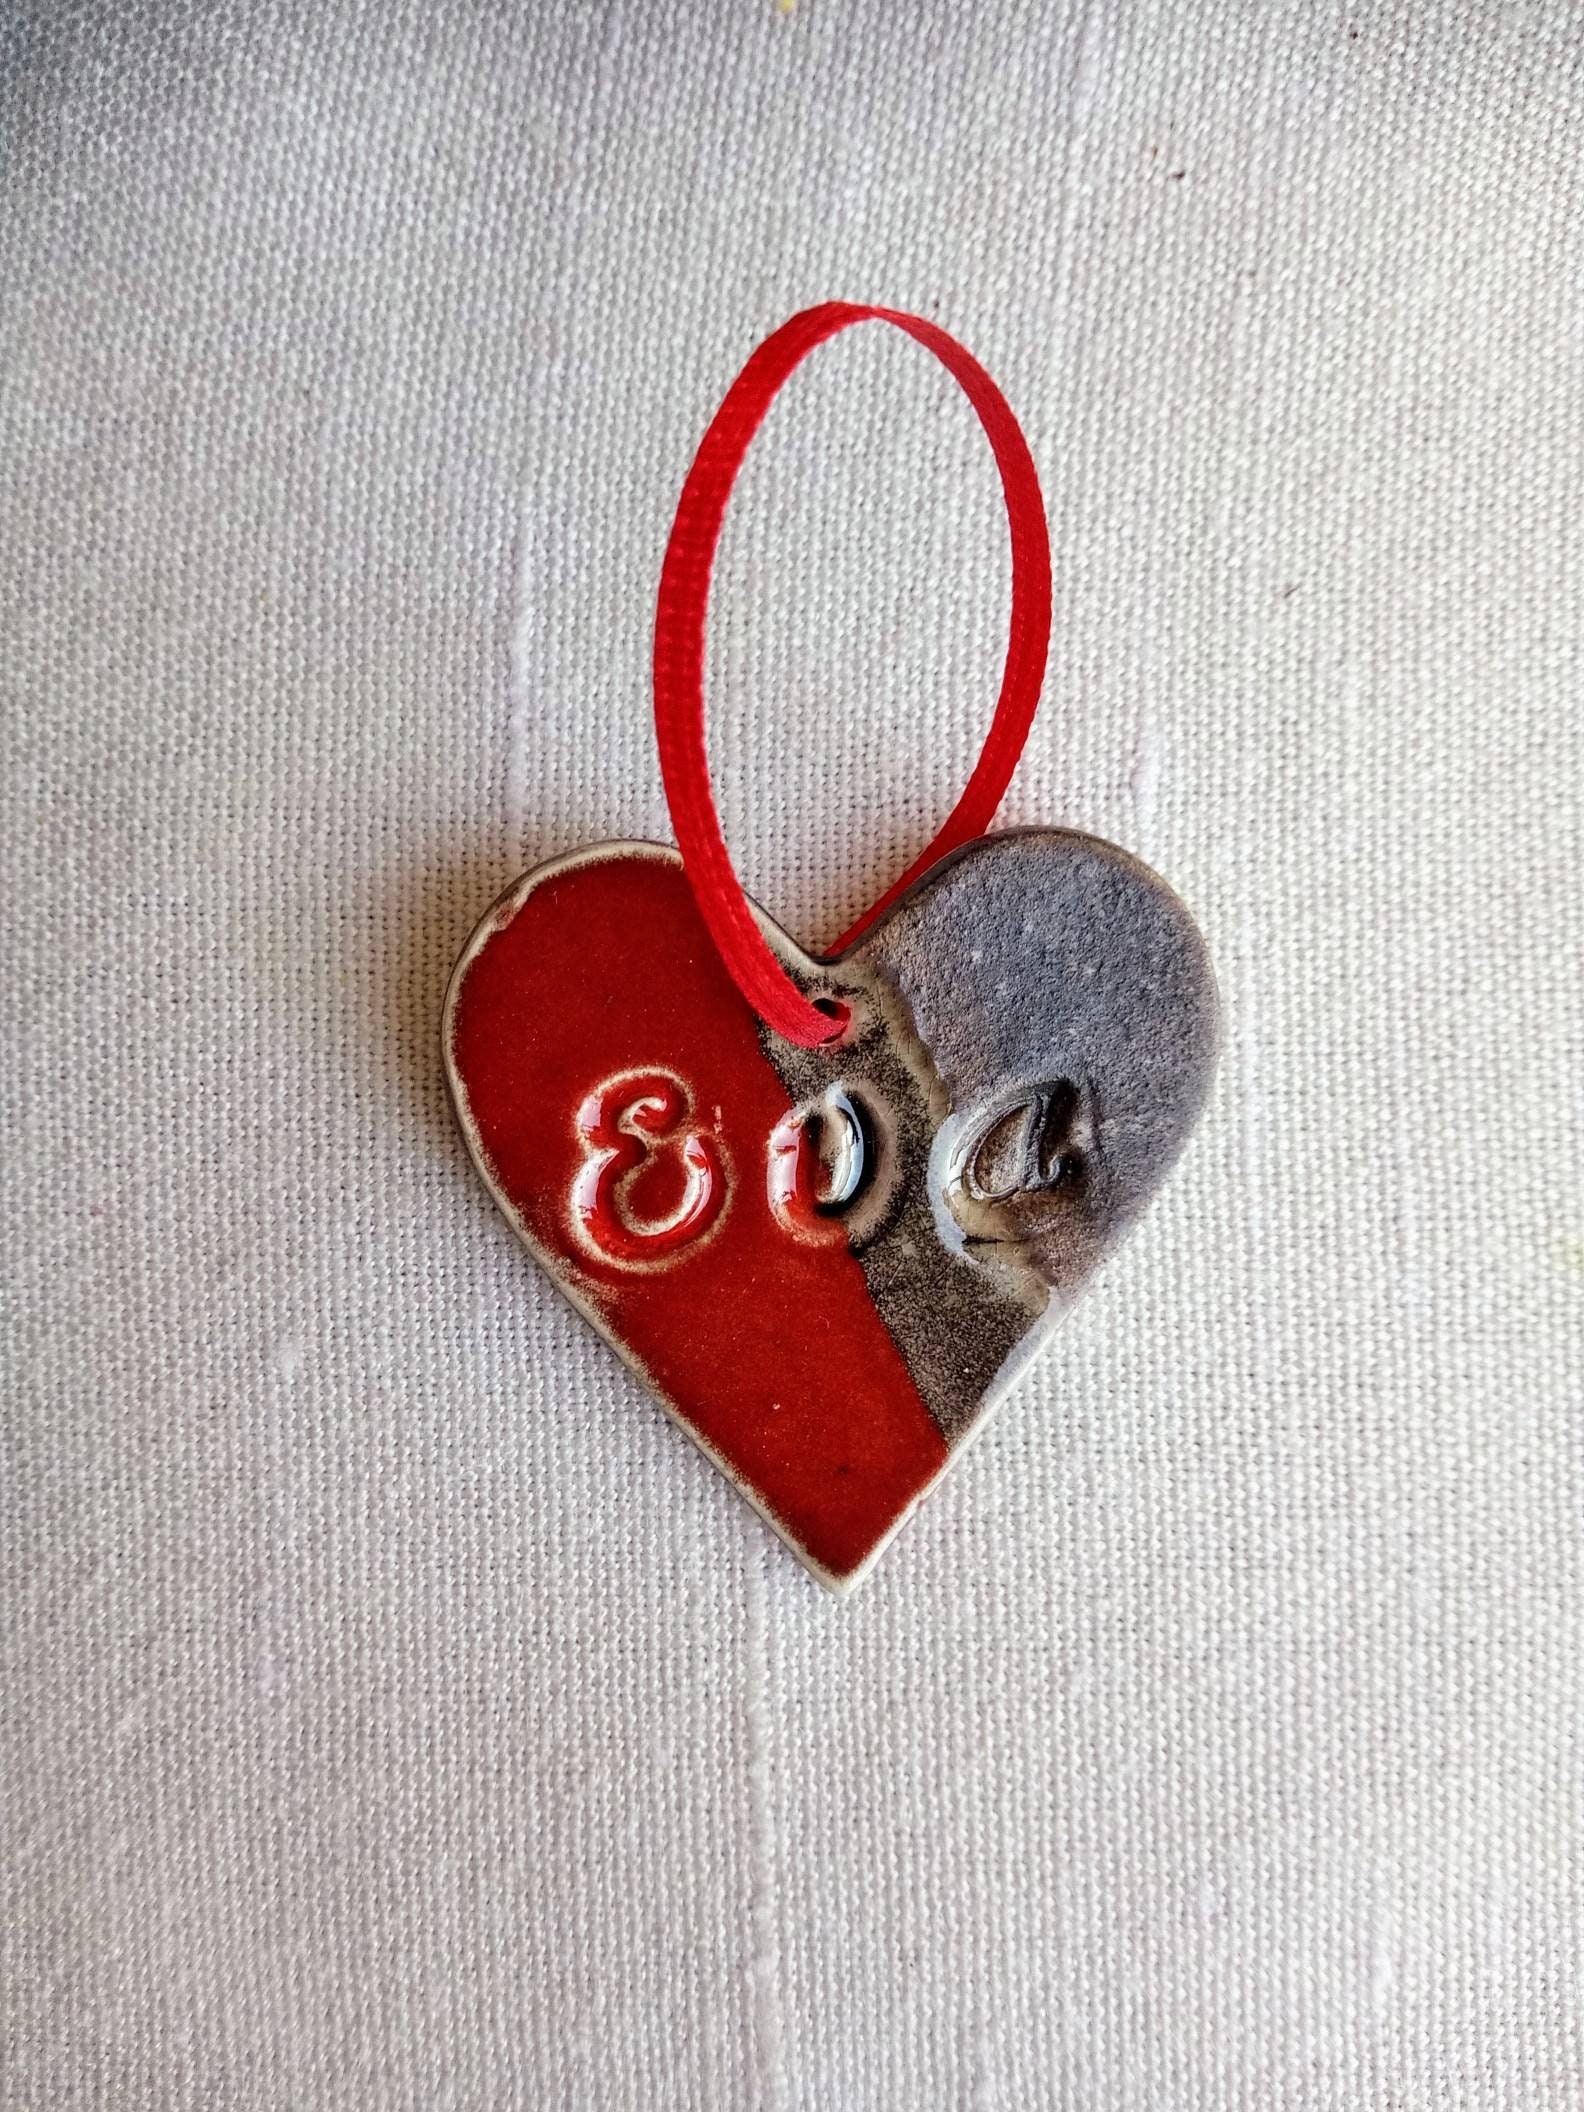 PERSONALIZED heart ornament / heart ornament / heart christmas | Etsy